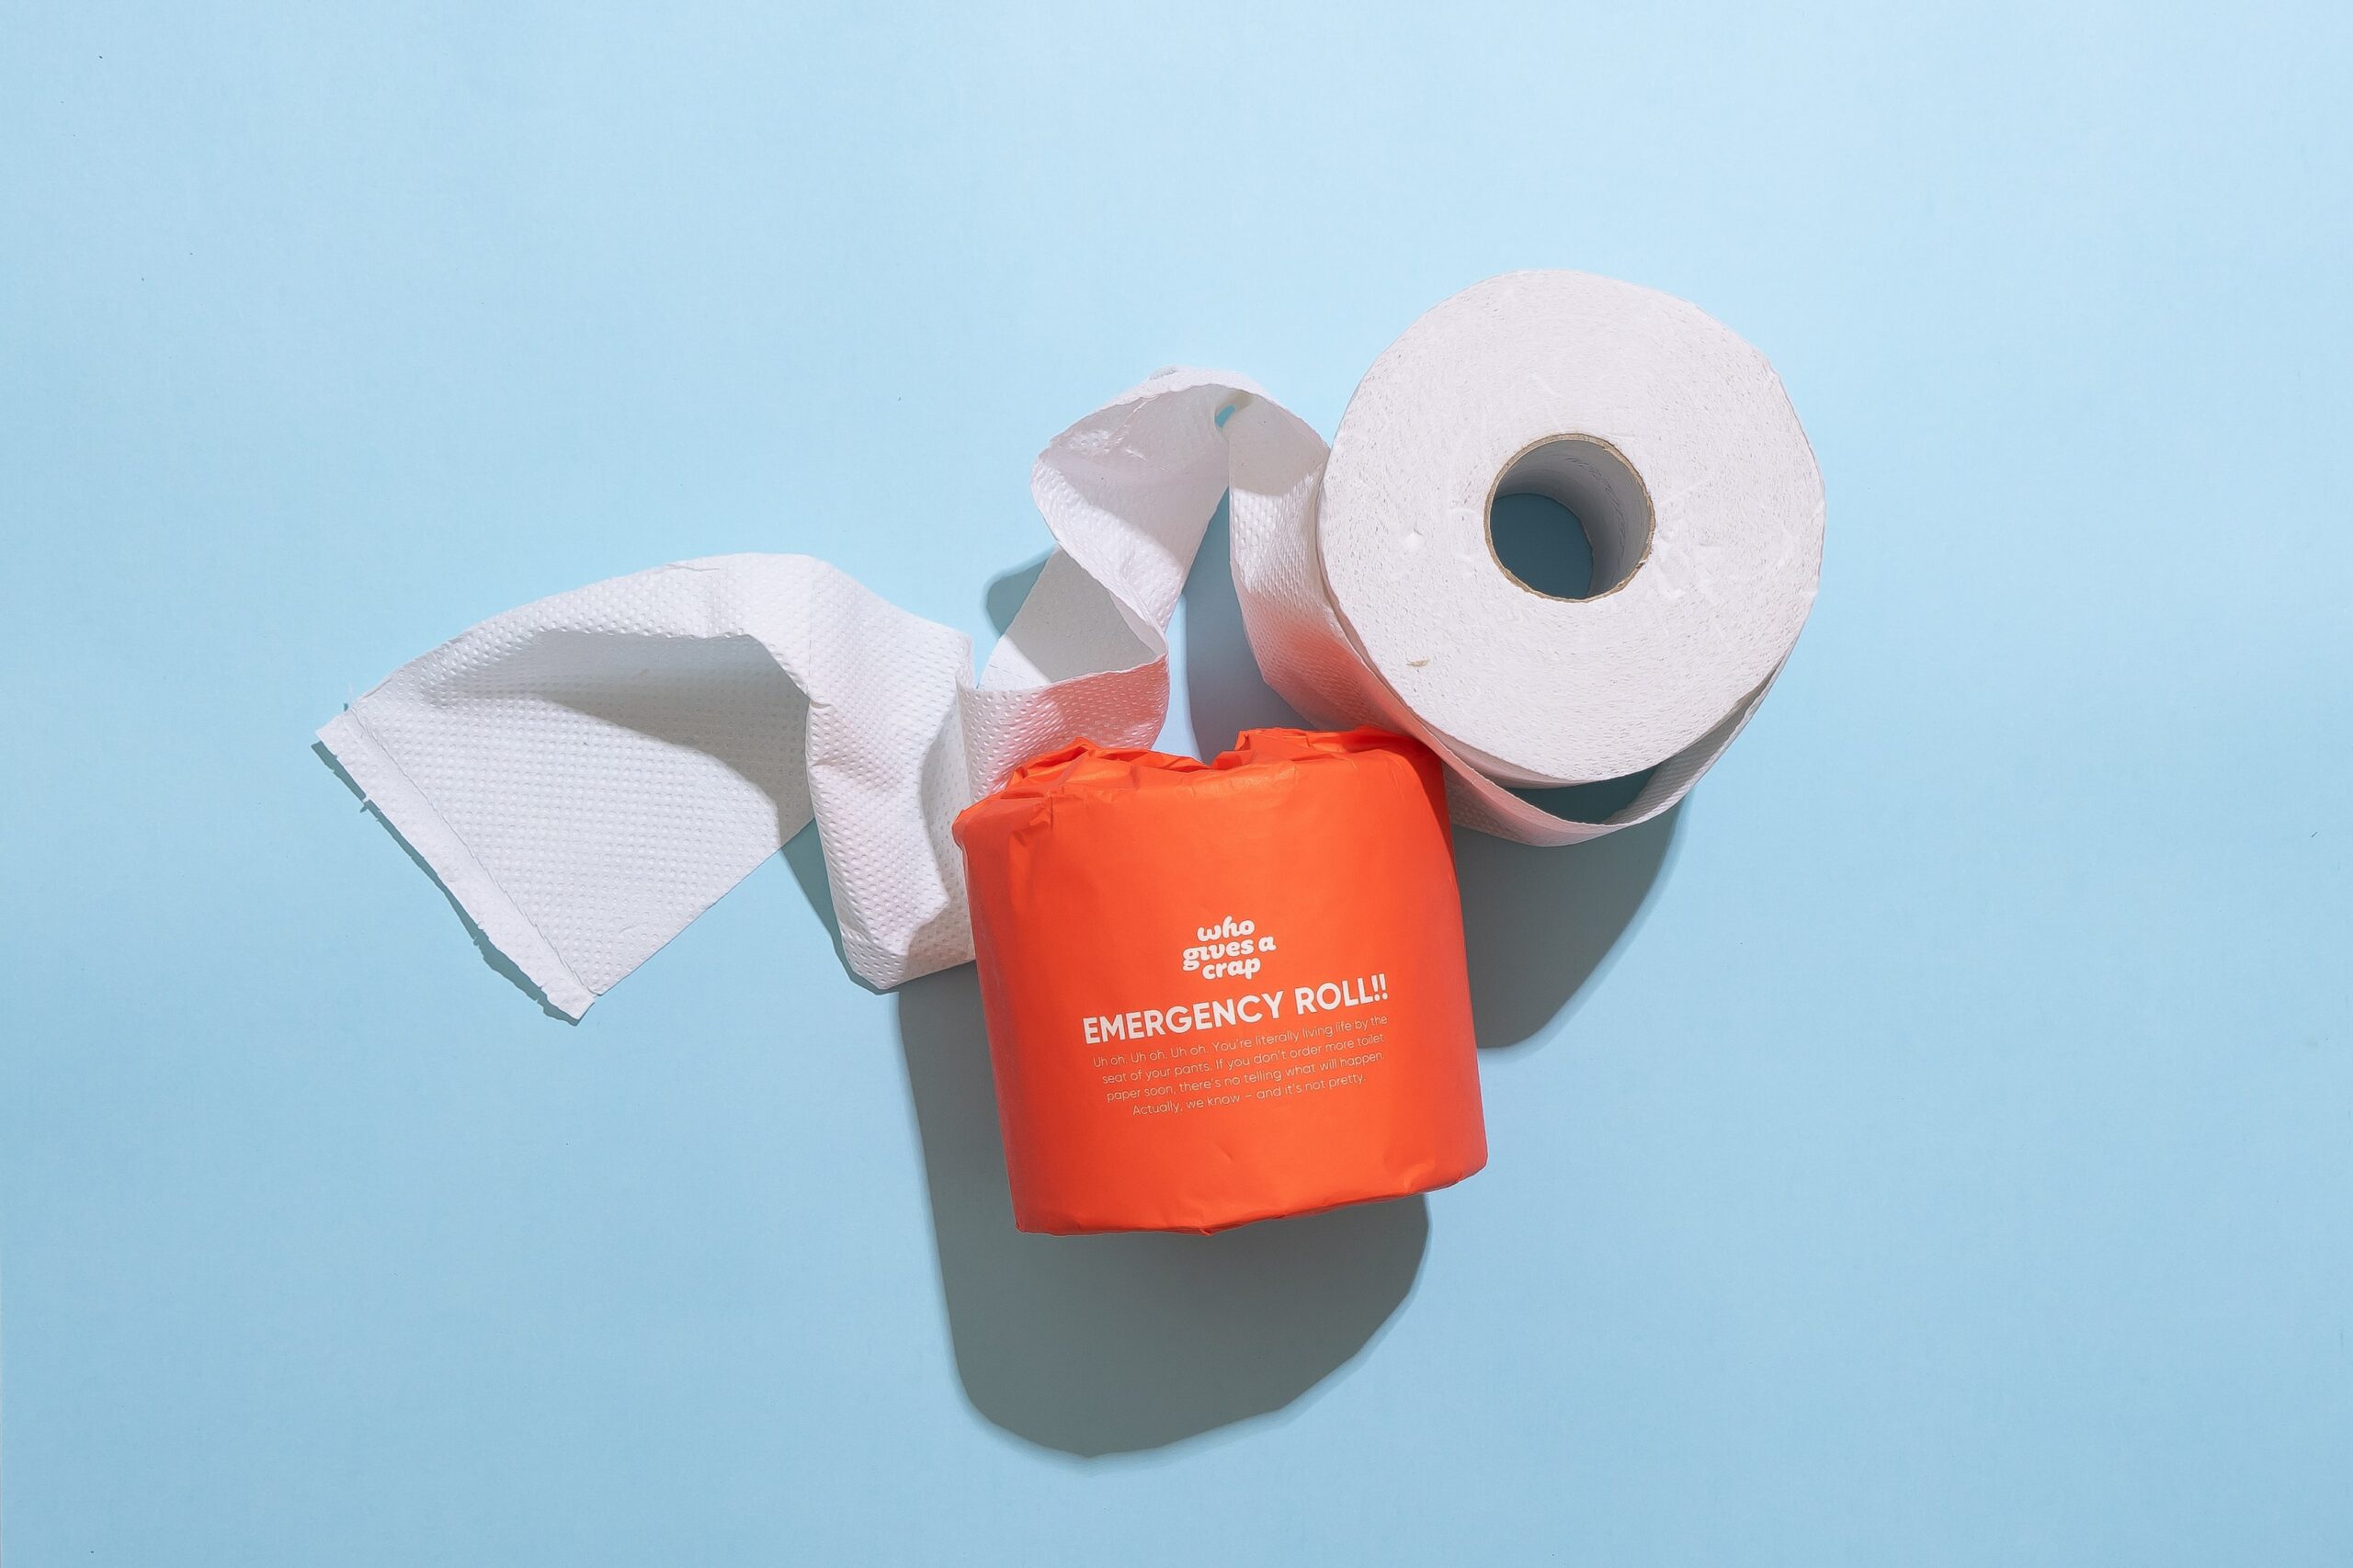 A roll of toilet paper labeled as "emergency"